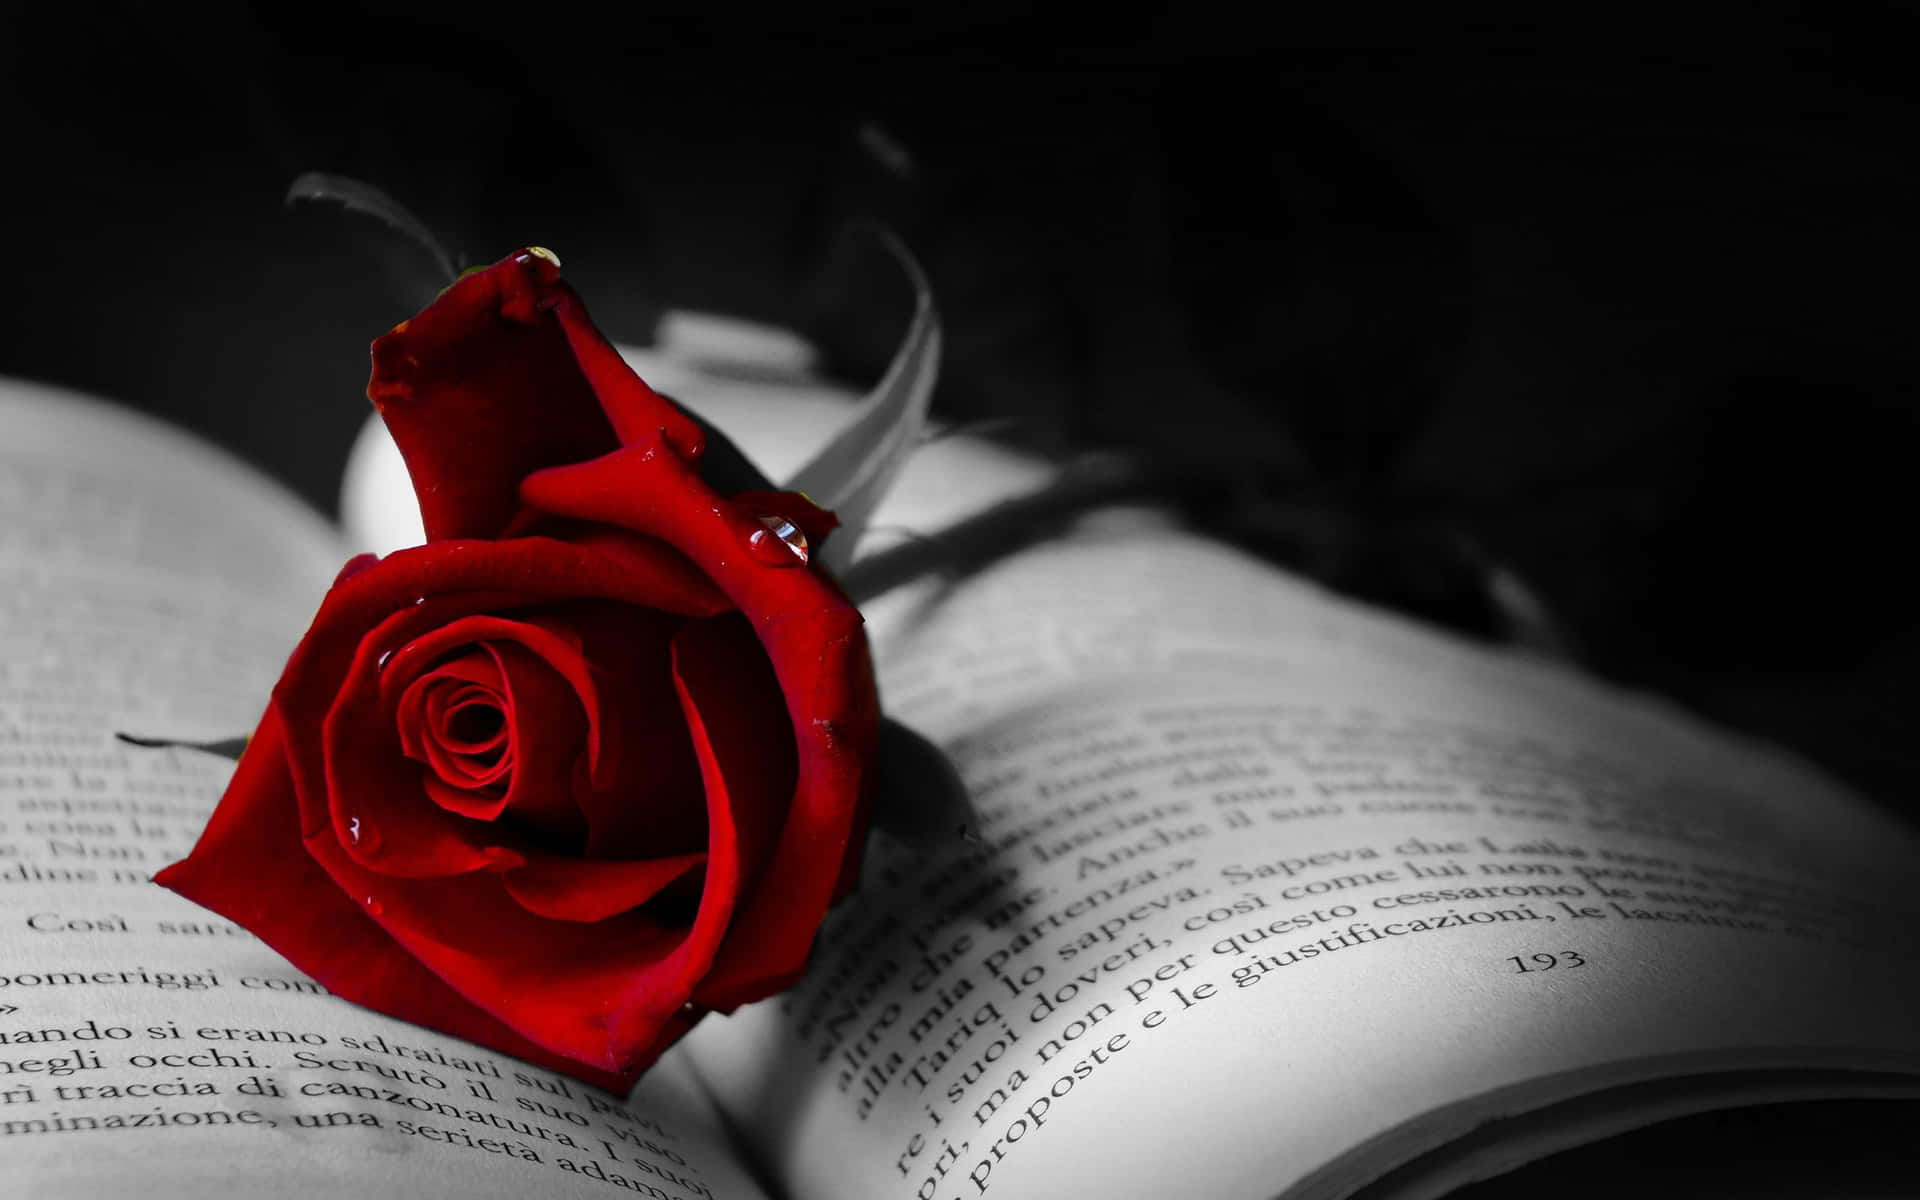 A scarlet Red Rose symbolizing love, passion and beauty